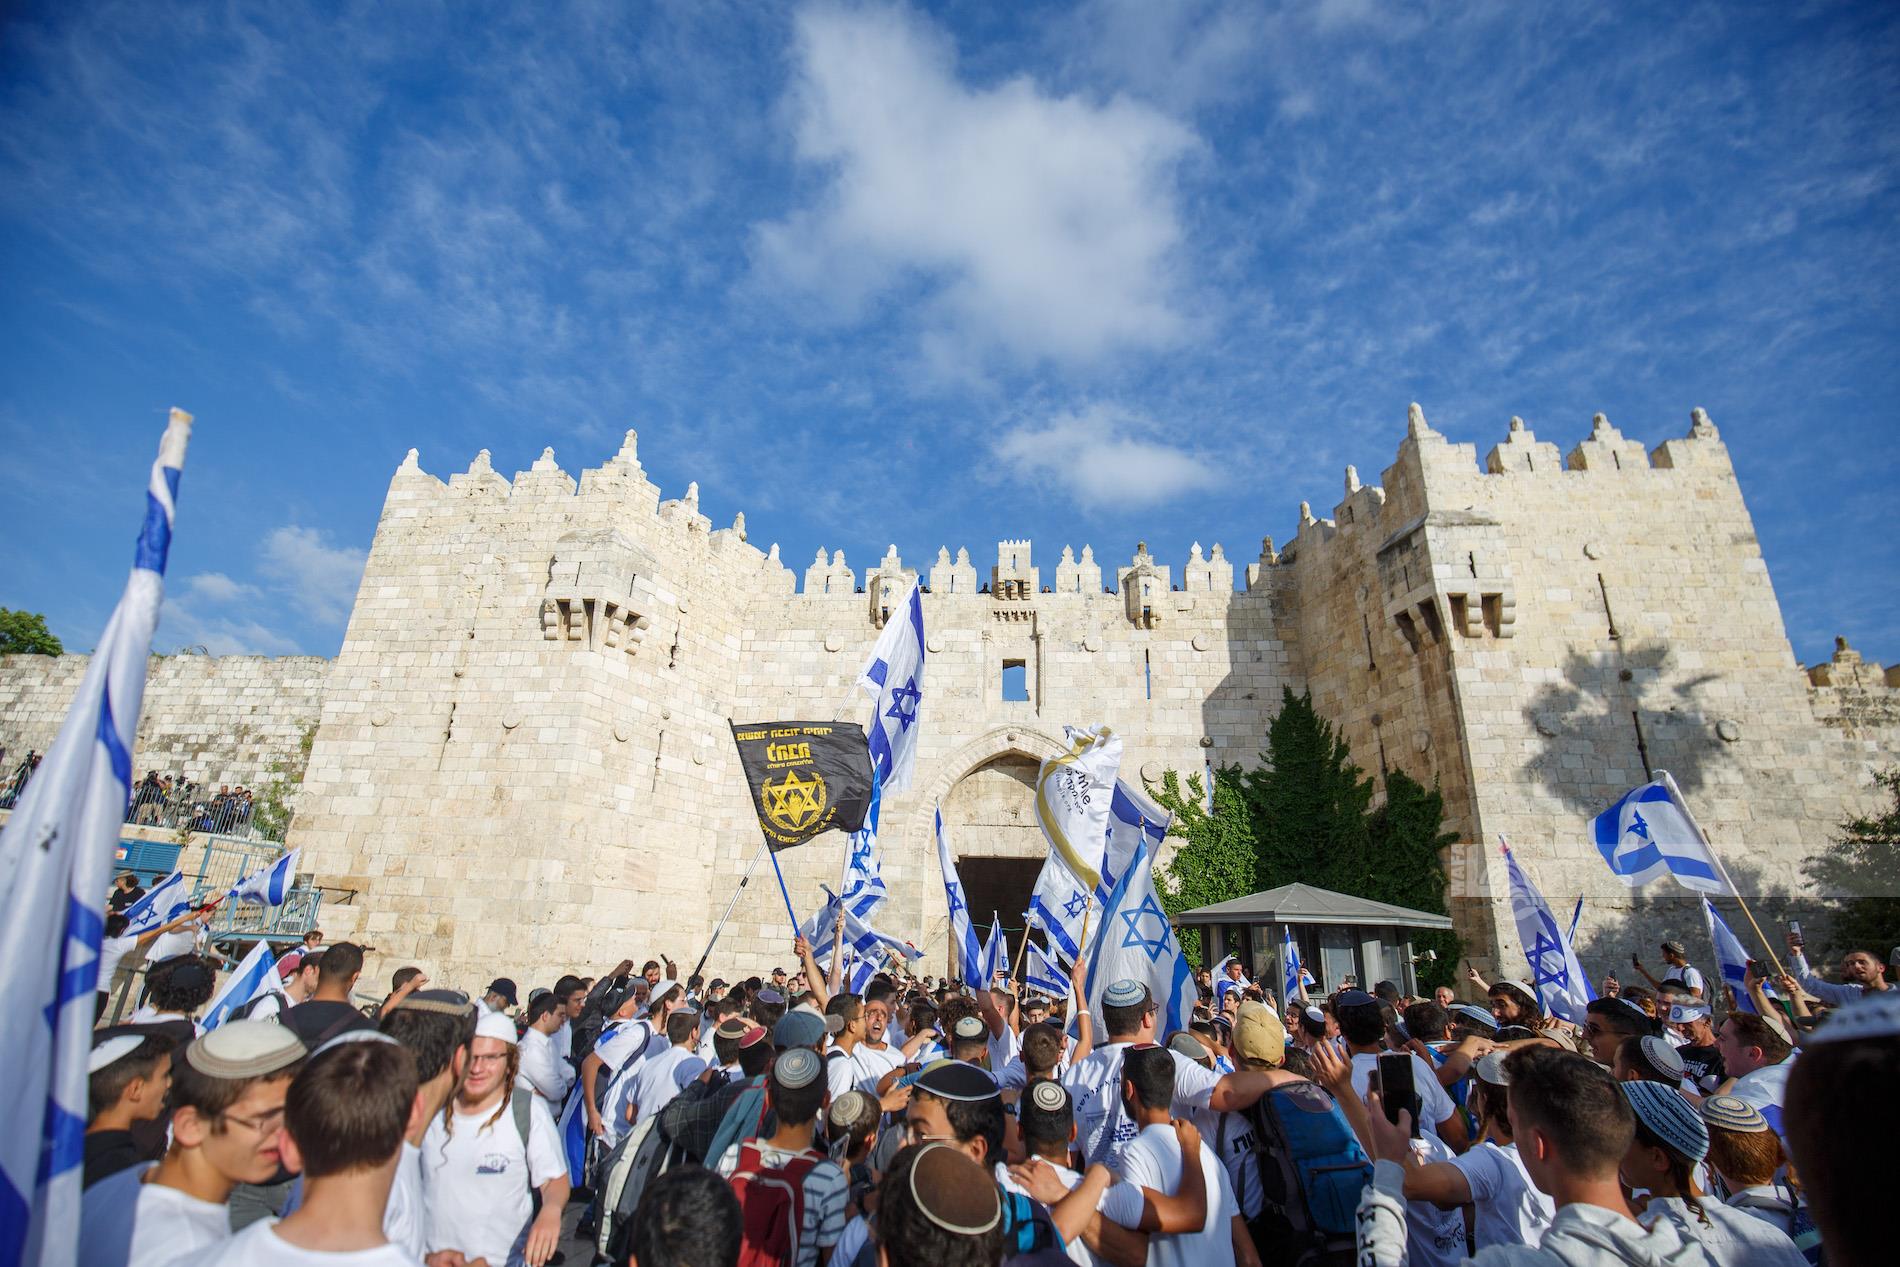 Israeli authorities turn Jerusalem sites into military zone to secure colonists' flag march